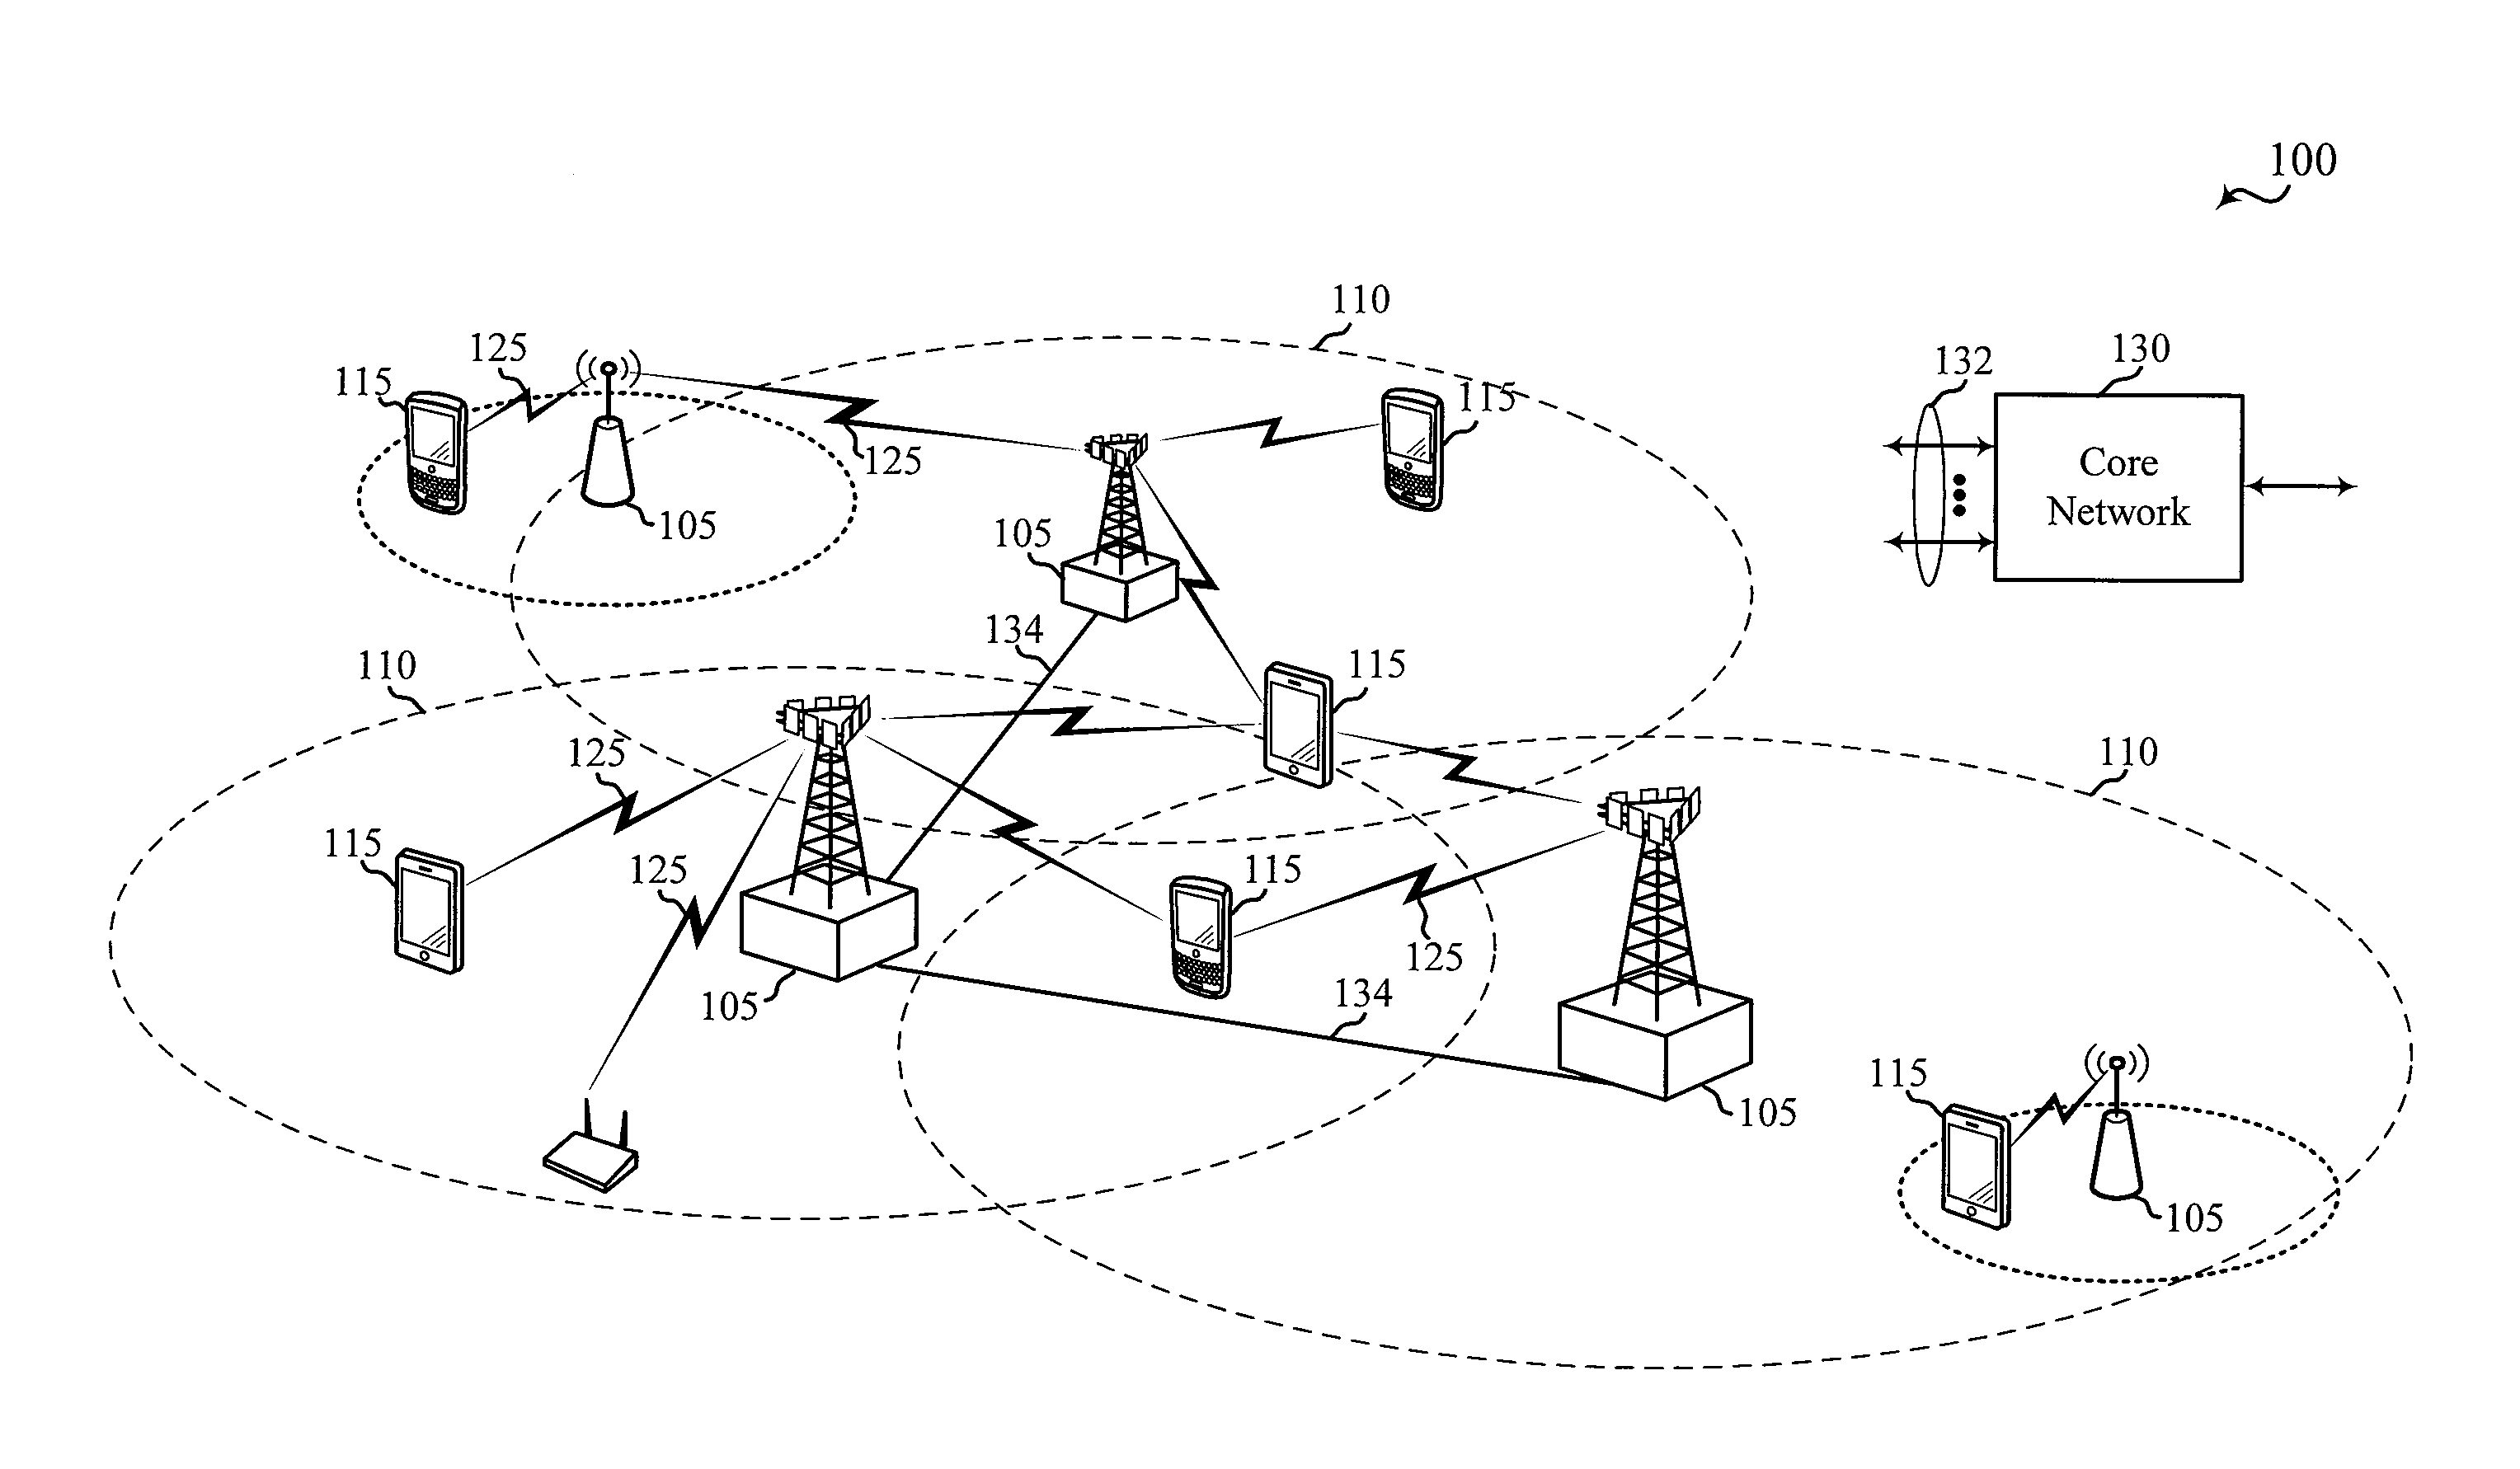 Multi-channel csi feedback for lte/lte-a with unlicensed spectrum